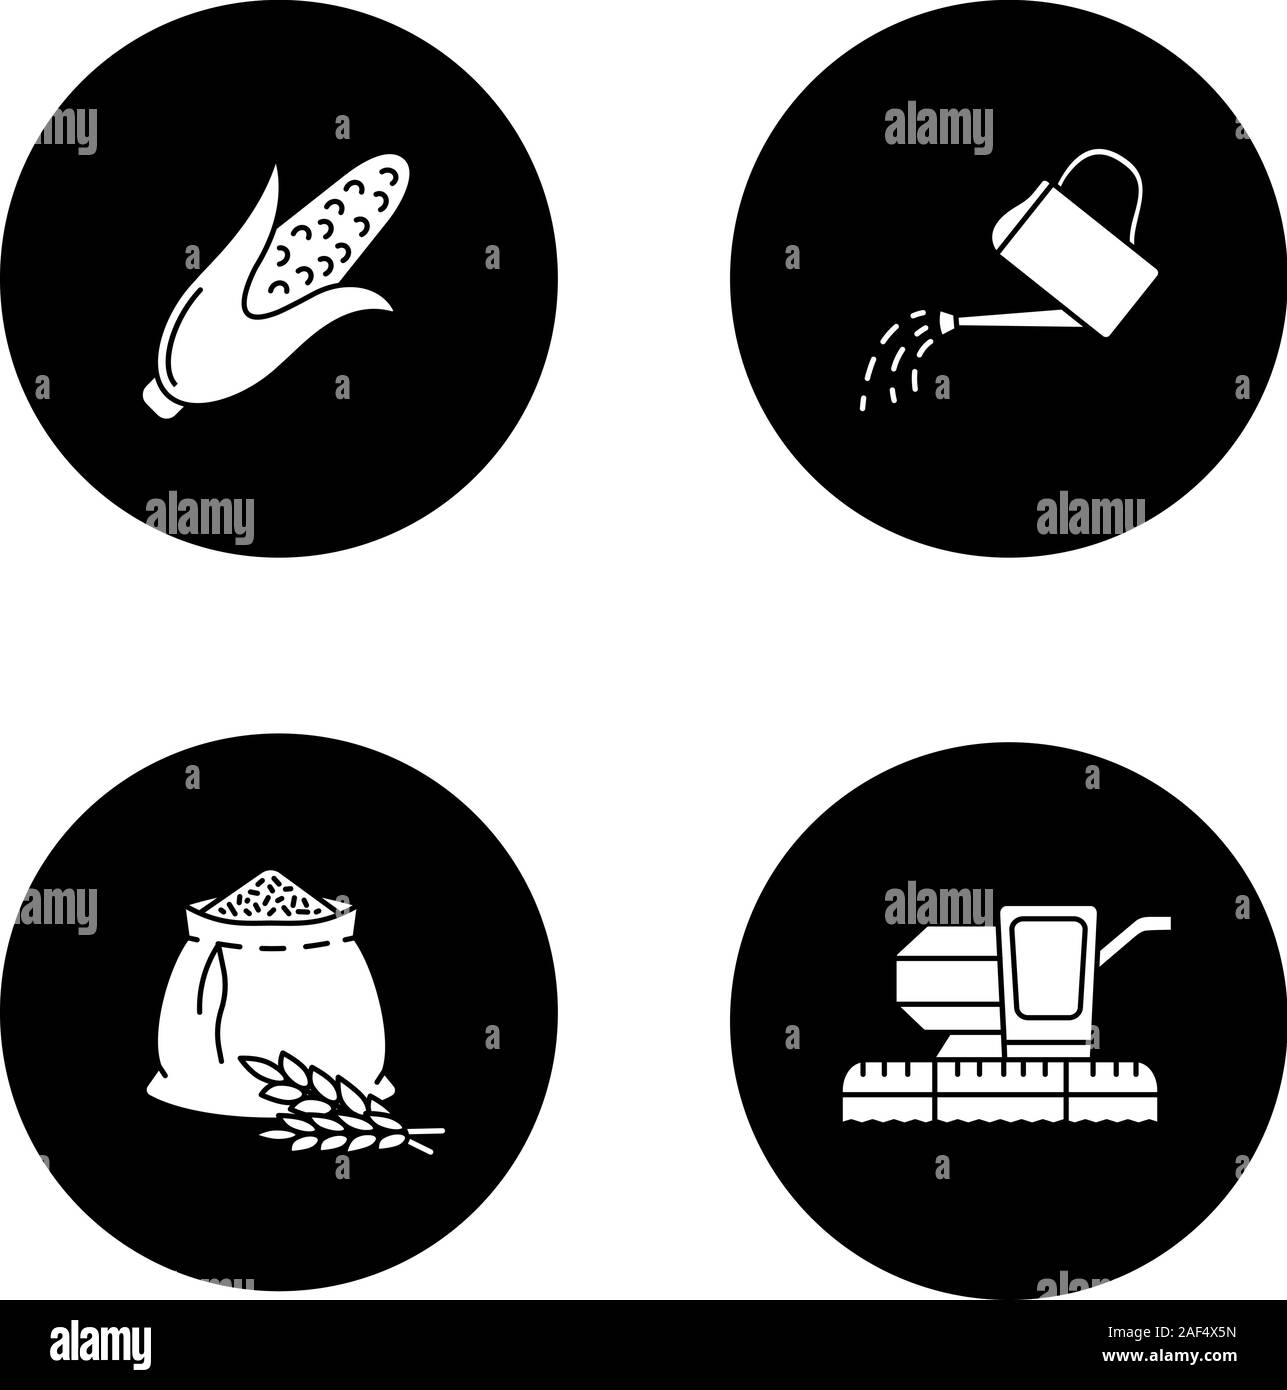 Agriculture glyph icons set. Farming. Corn, watering can, flour bag, combine harvester. Vector white silhouettes illustrations in black circles Stock Vector